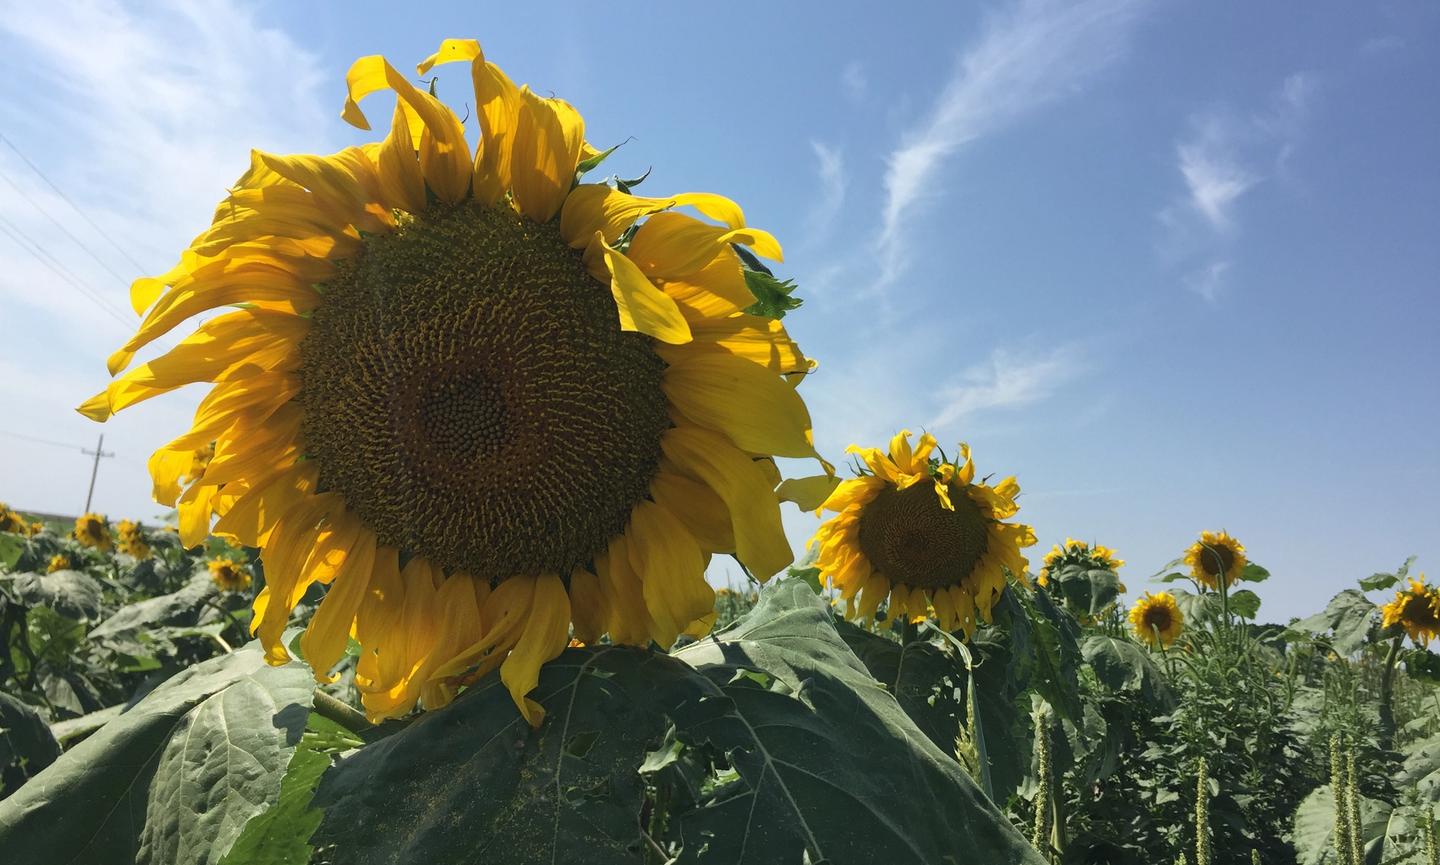 Kansas sunflowers bloom, symbolizing the state's beauty and agricultural prowess.